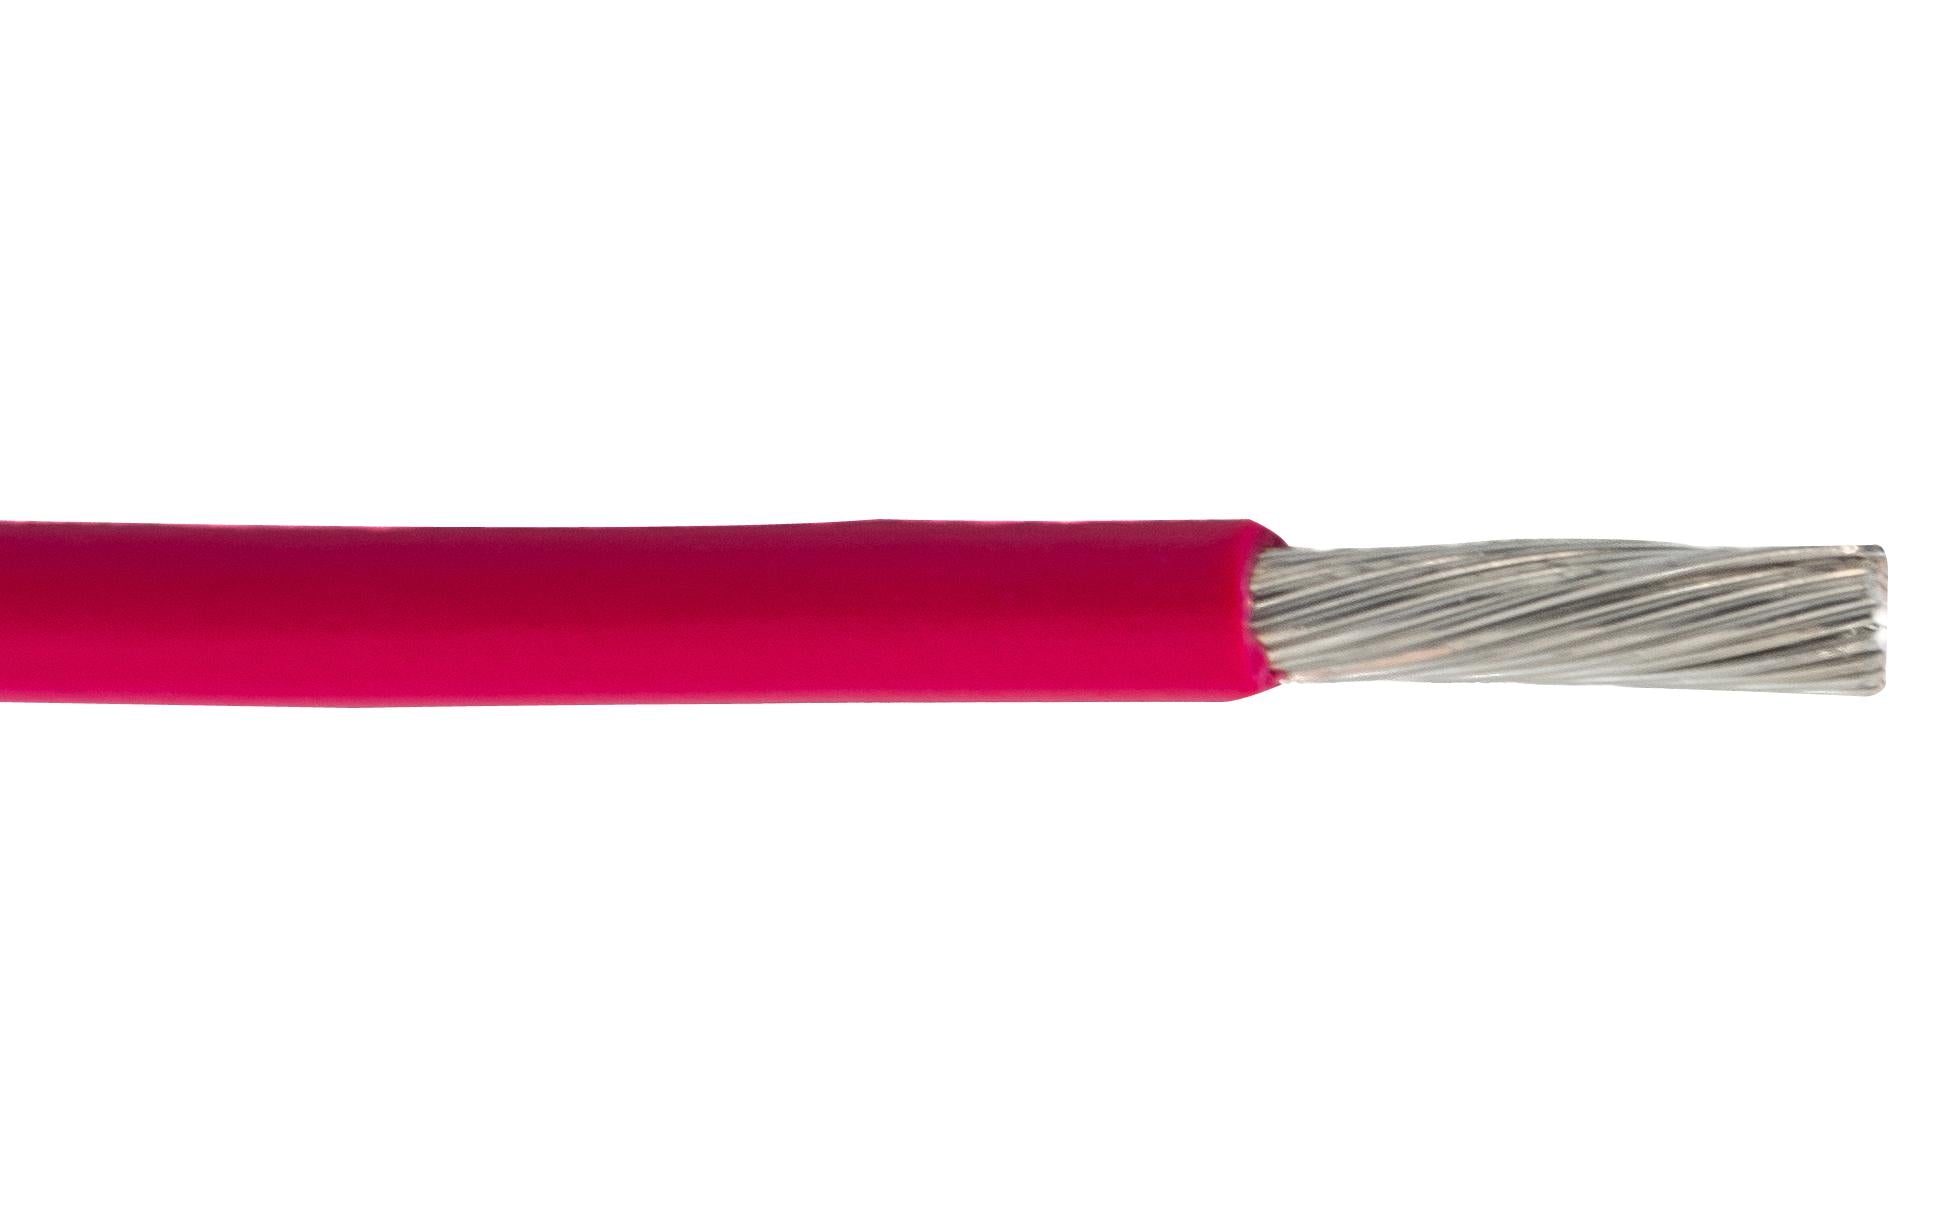 67050 RD HOOK-UP WIRE, 0.5MM2, RED, PER M ALPHA WIRE